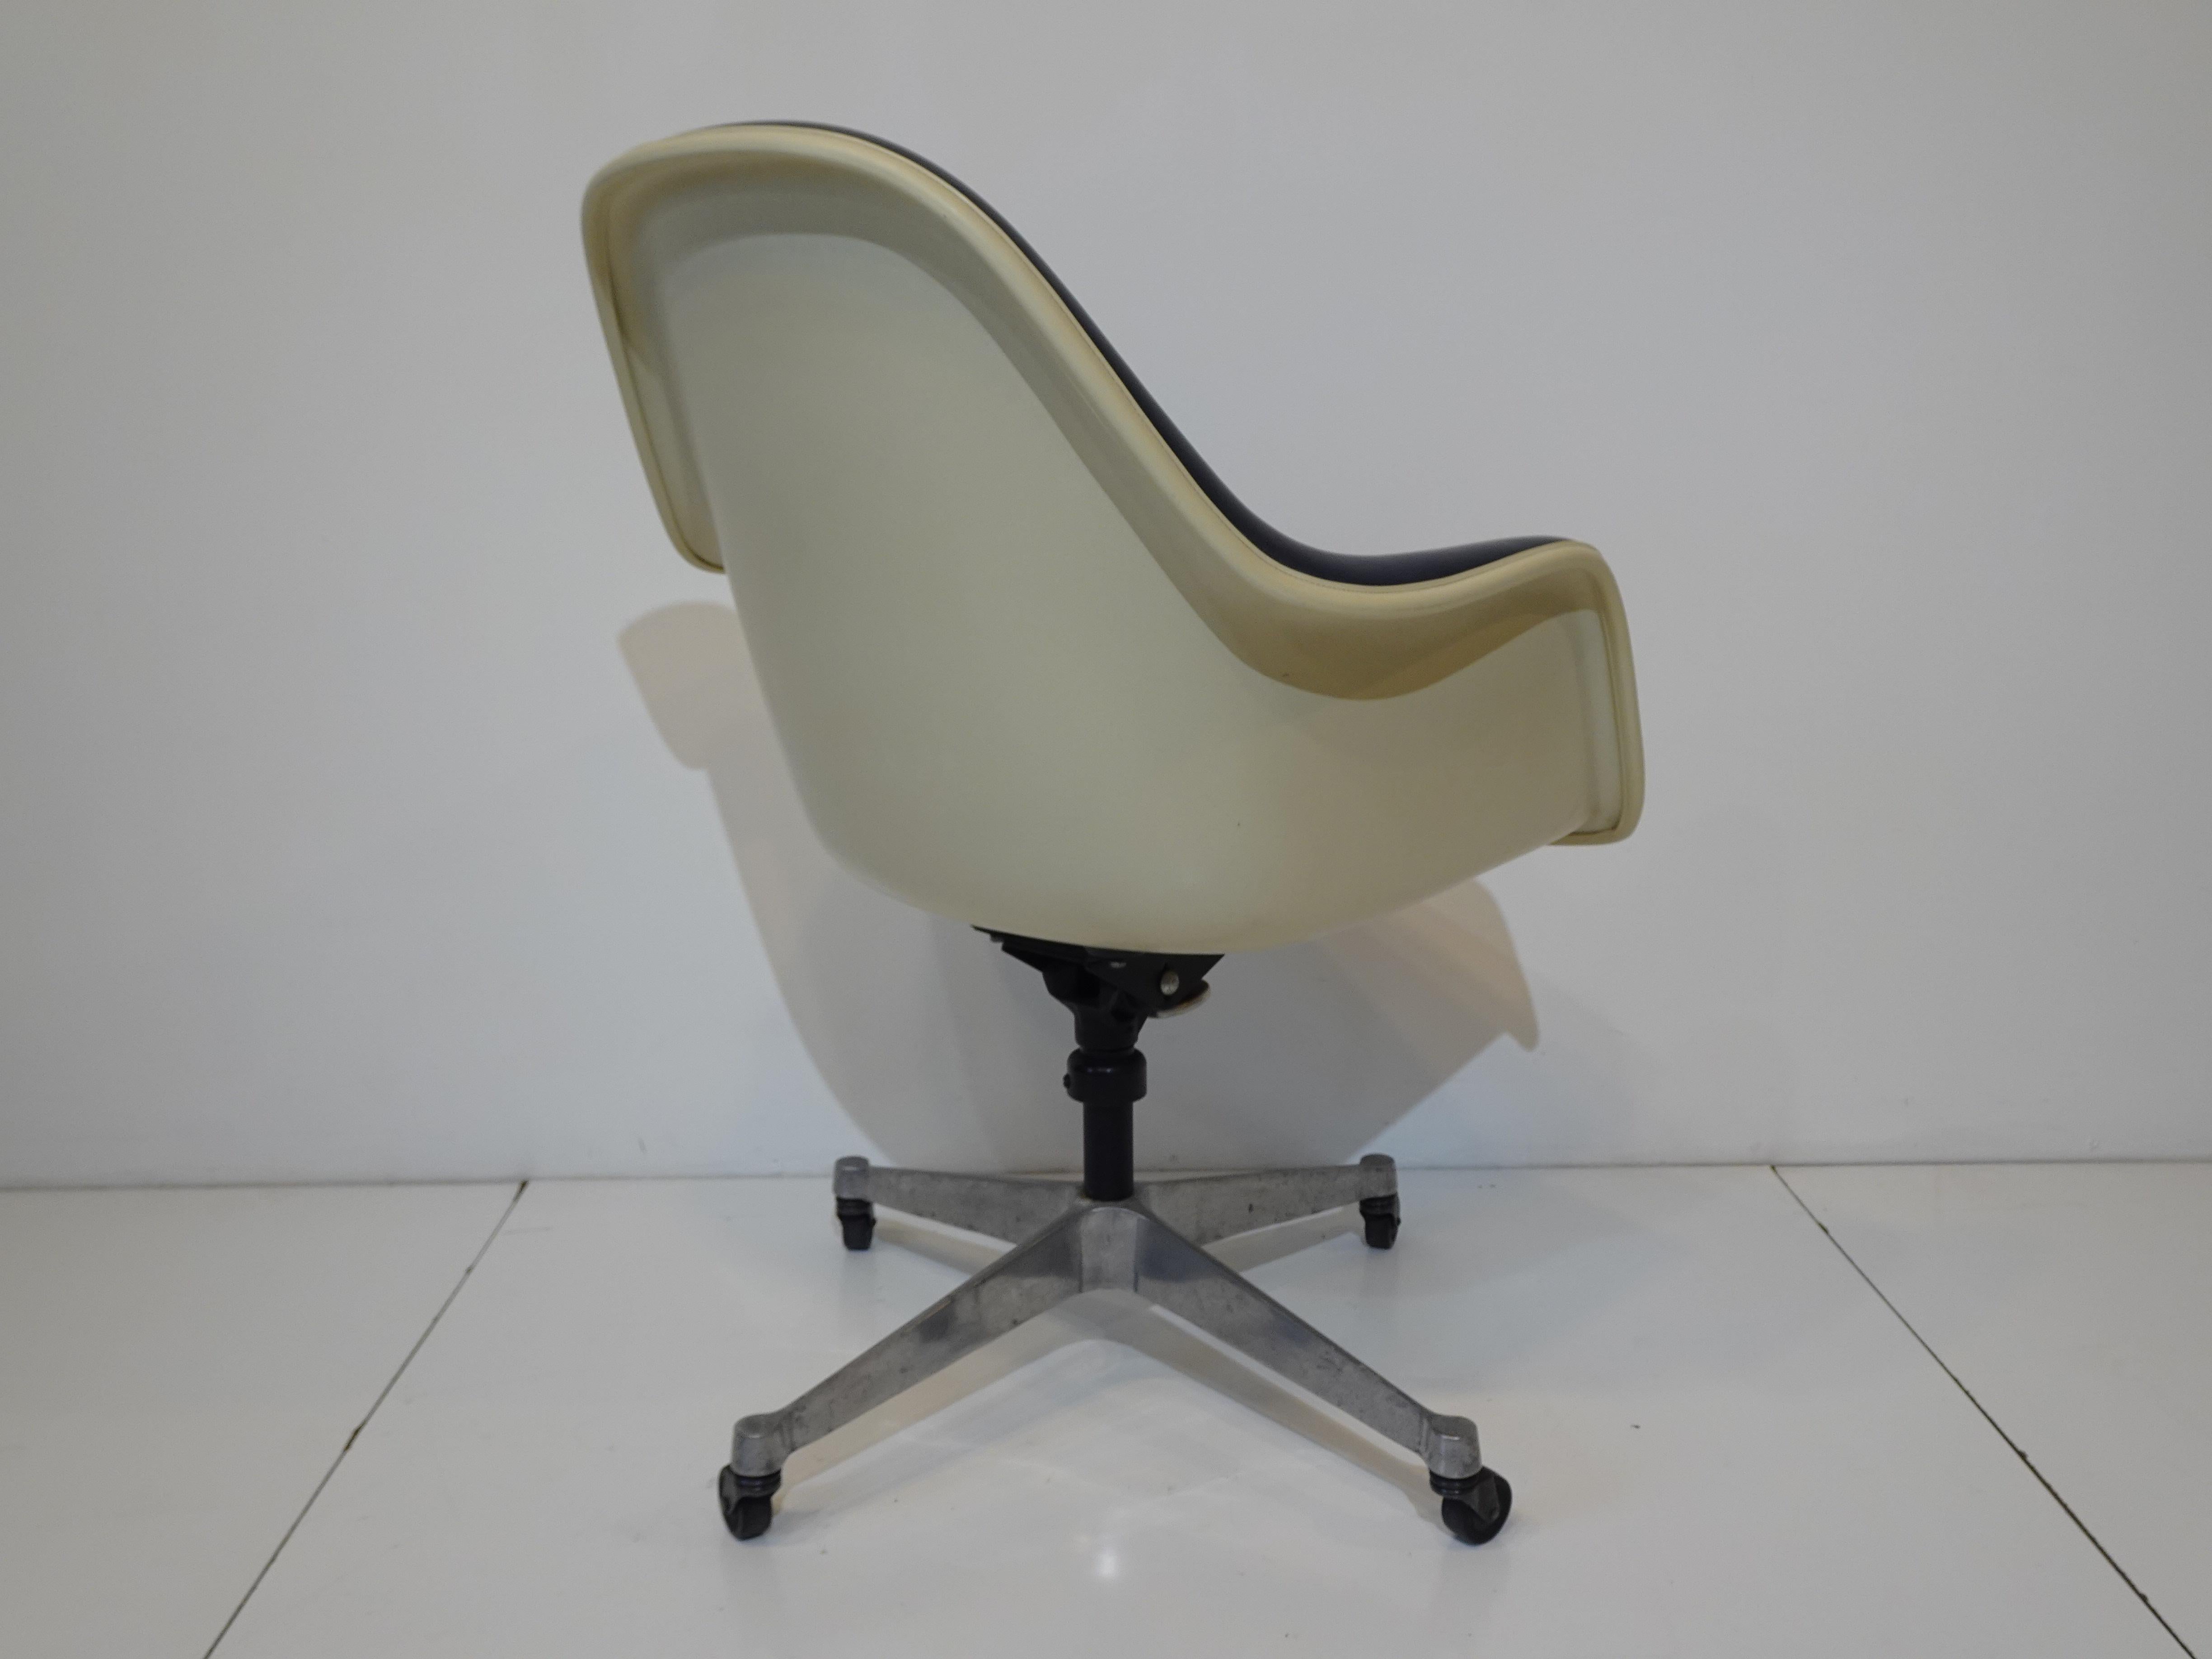 American Eames Upholstered Rolling High Back Desk Chair by Herman Miller